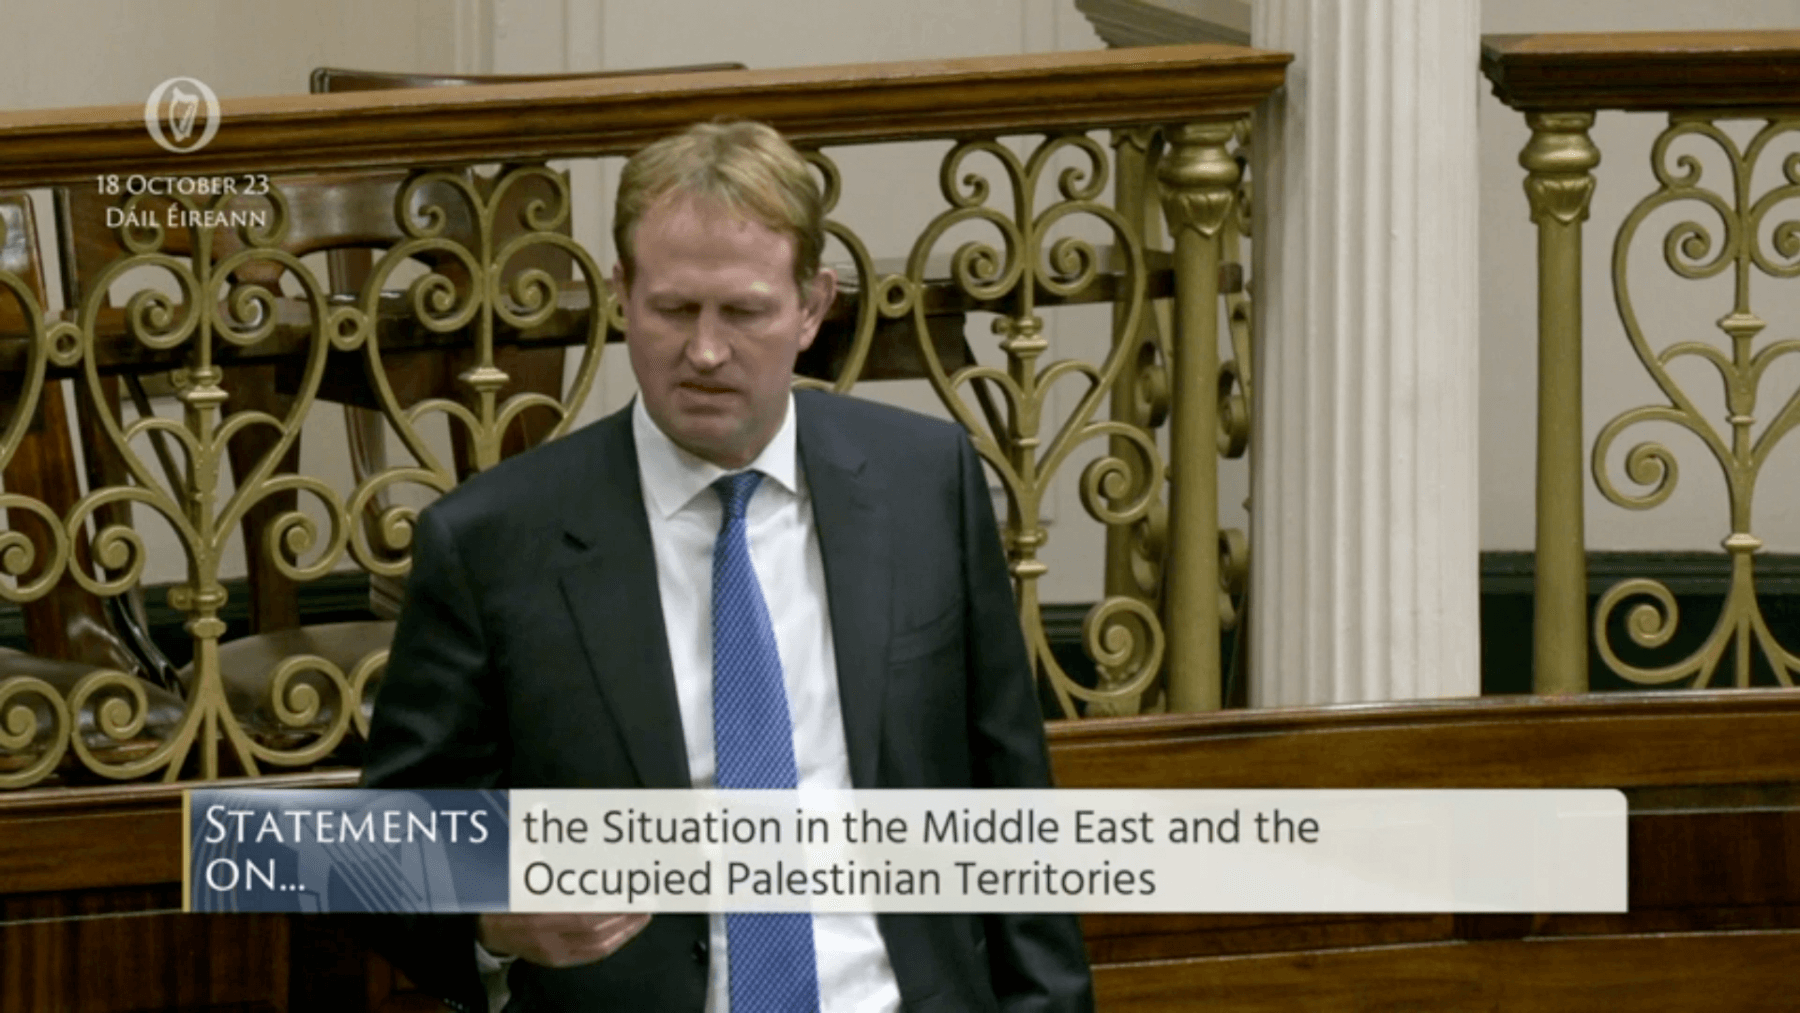 Statement on the Situation in the Middle East and the Occupied Palestinian Territories